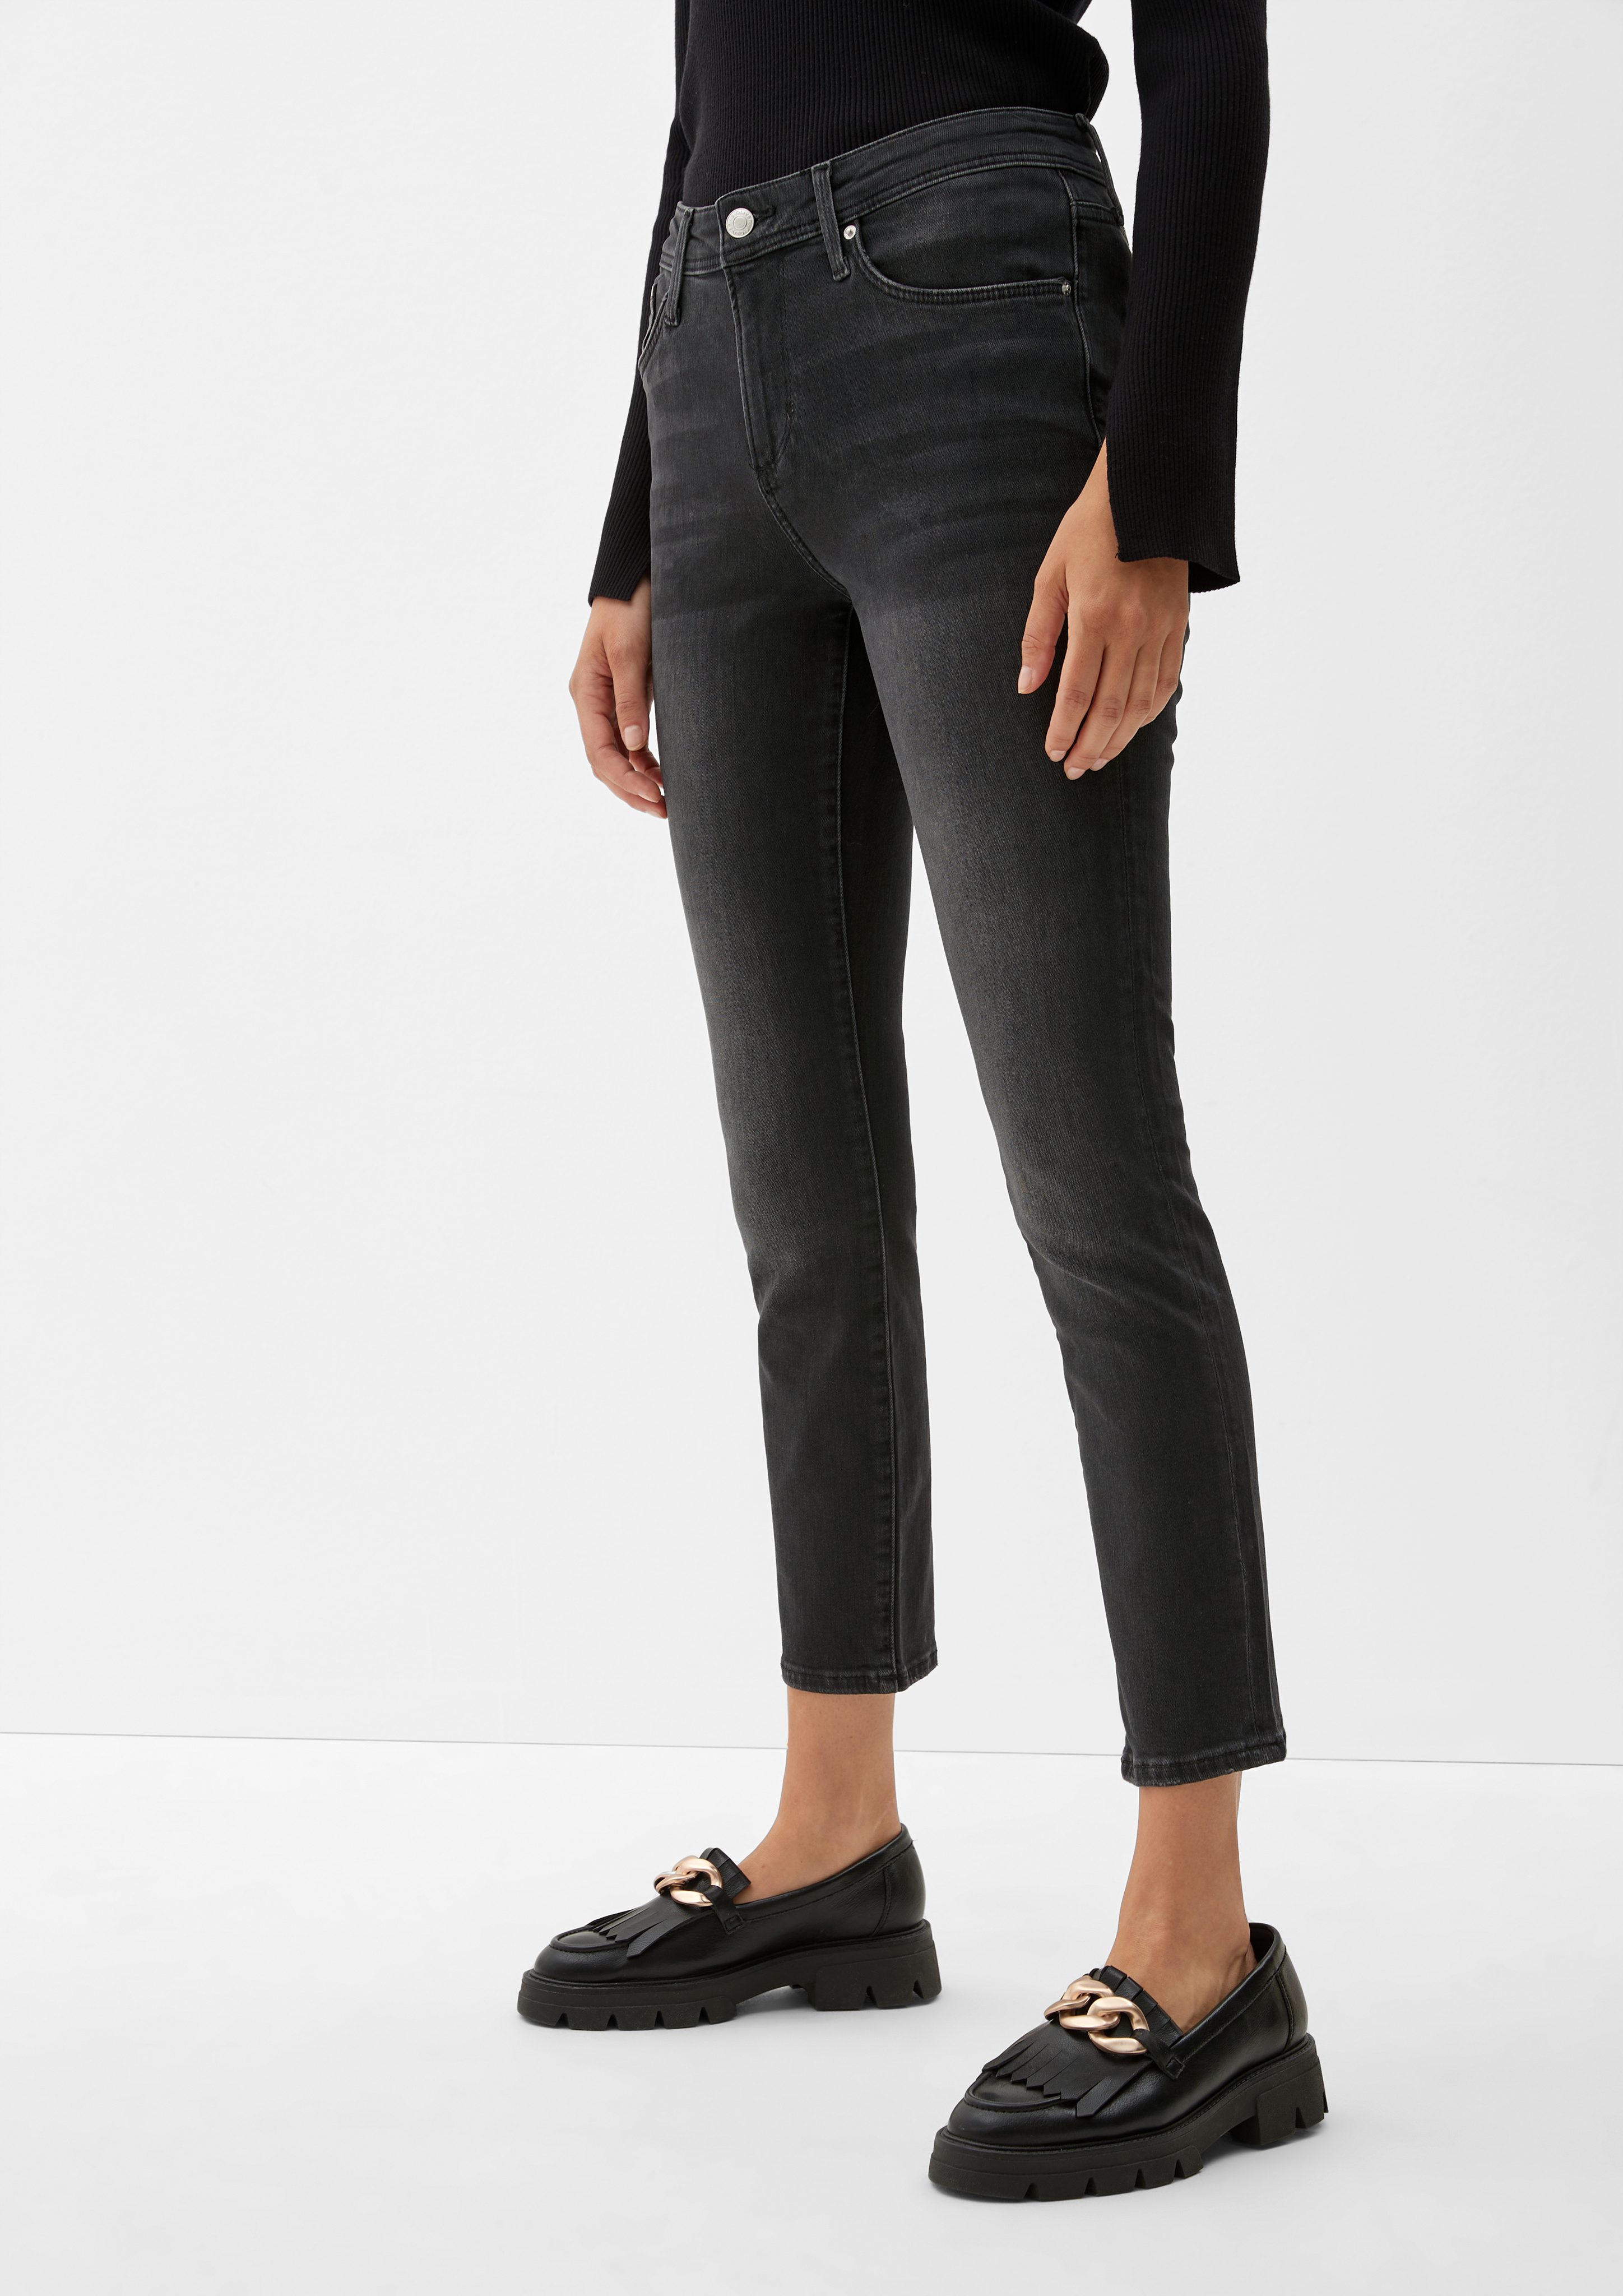 Cropped Jeans 7/8-Jeans graphit s.Oliver Slim: Waschung